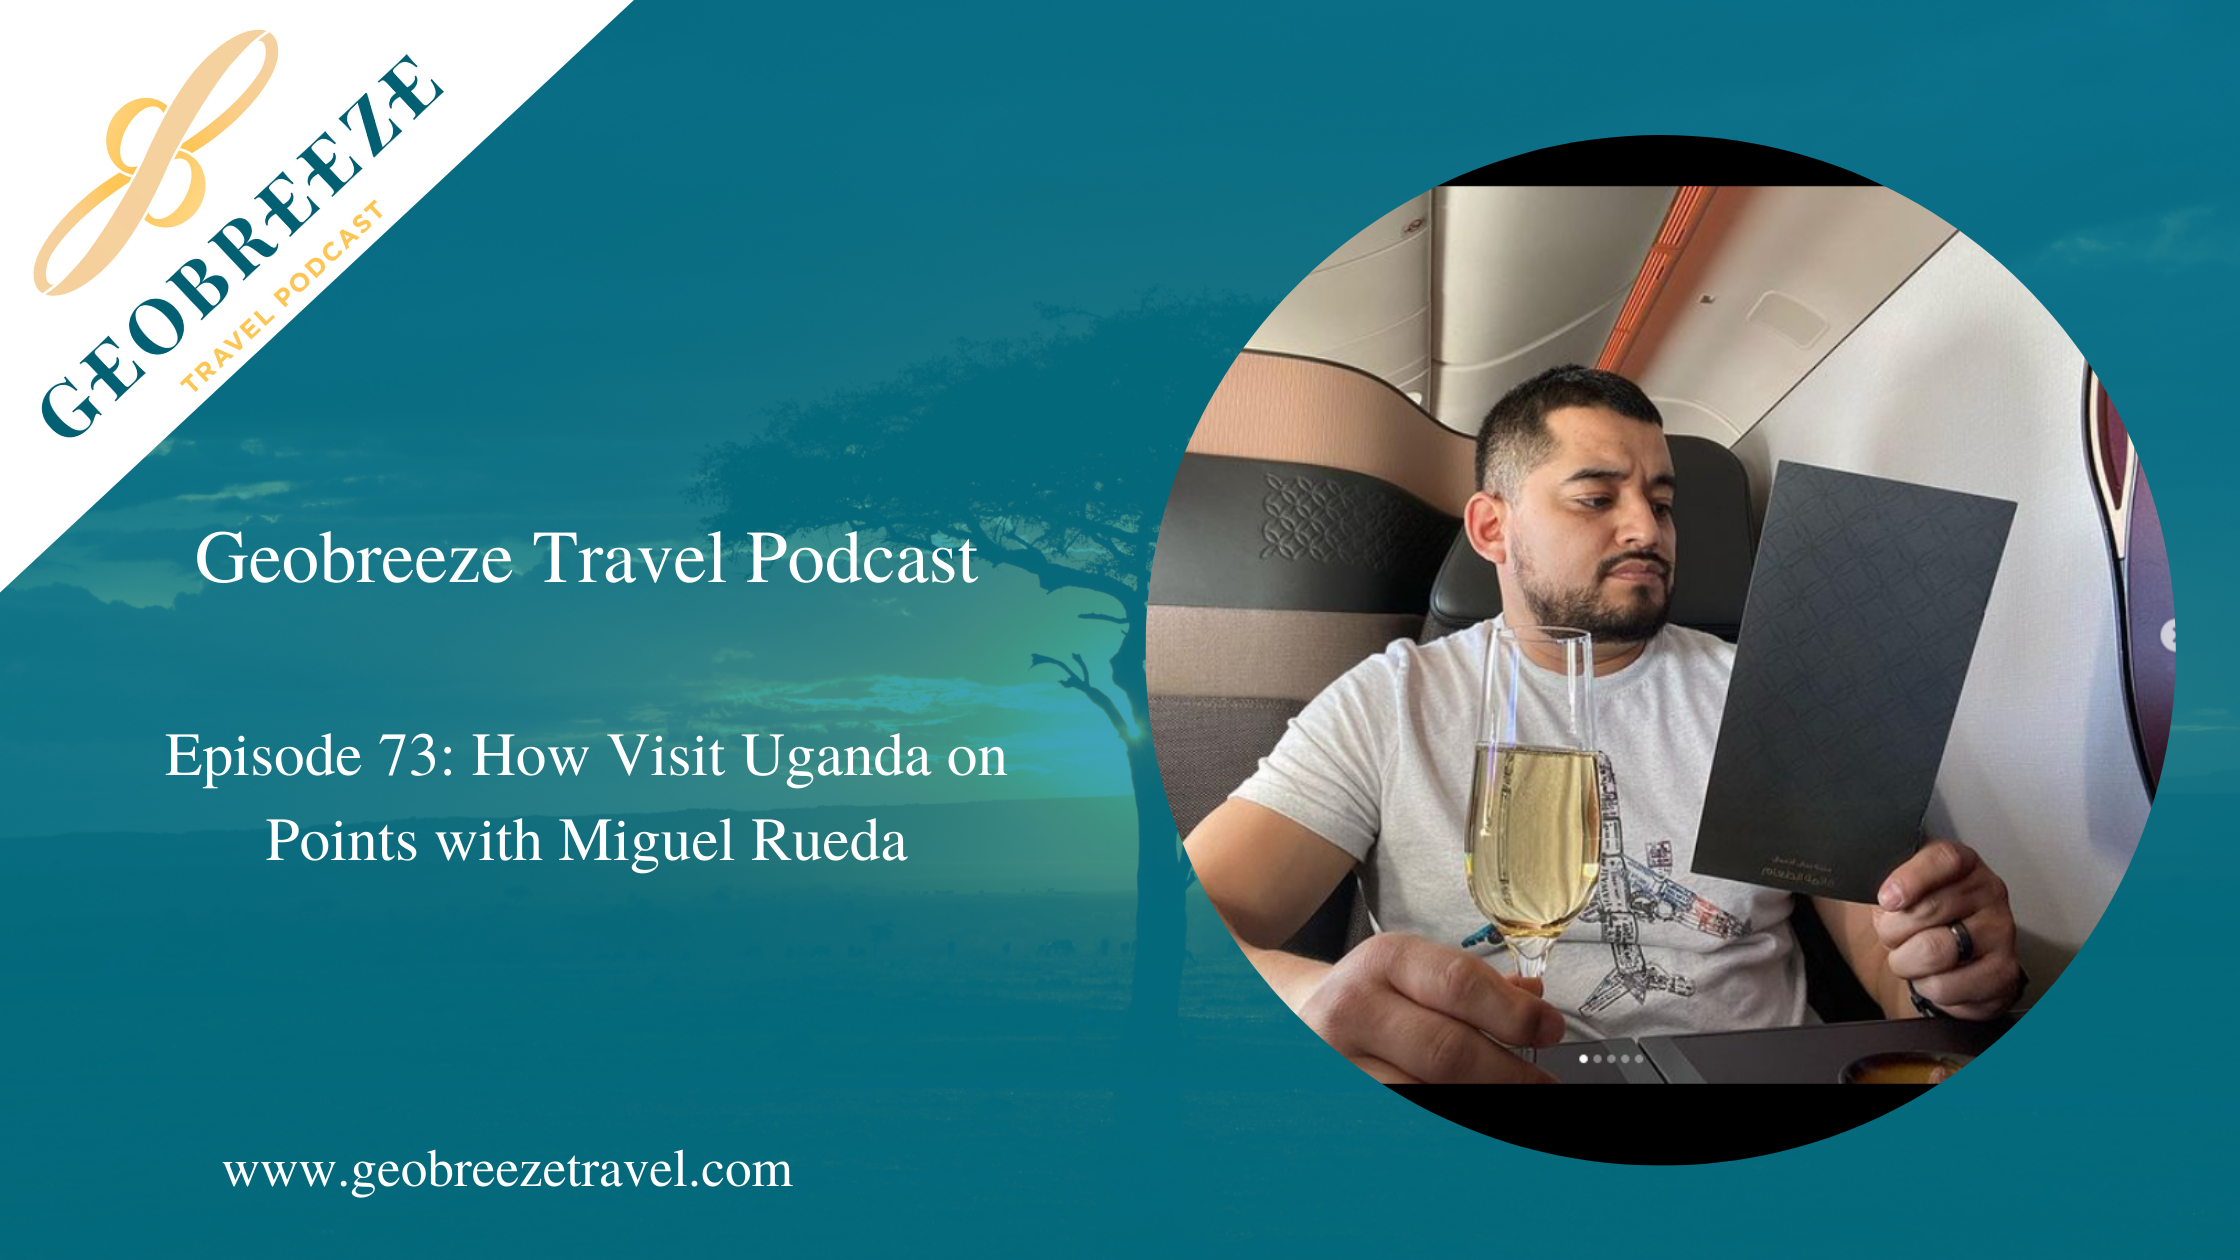 Episode 73: How to Travel to Uganda on Points with Miguel Rueda